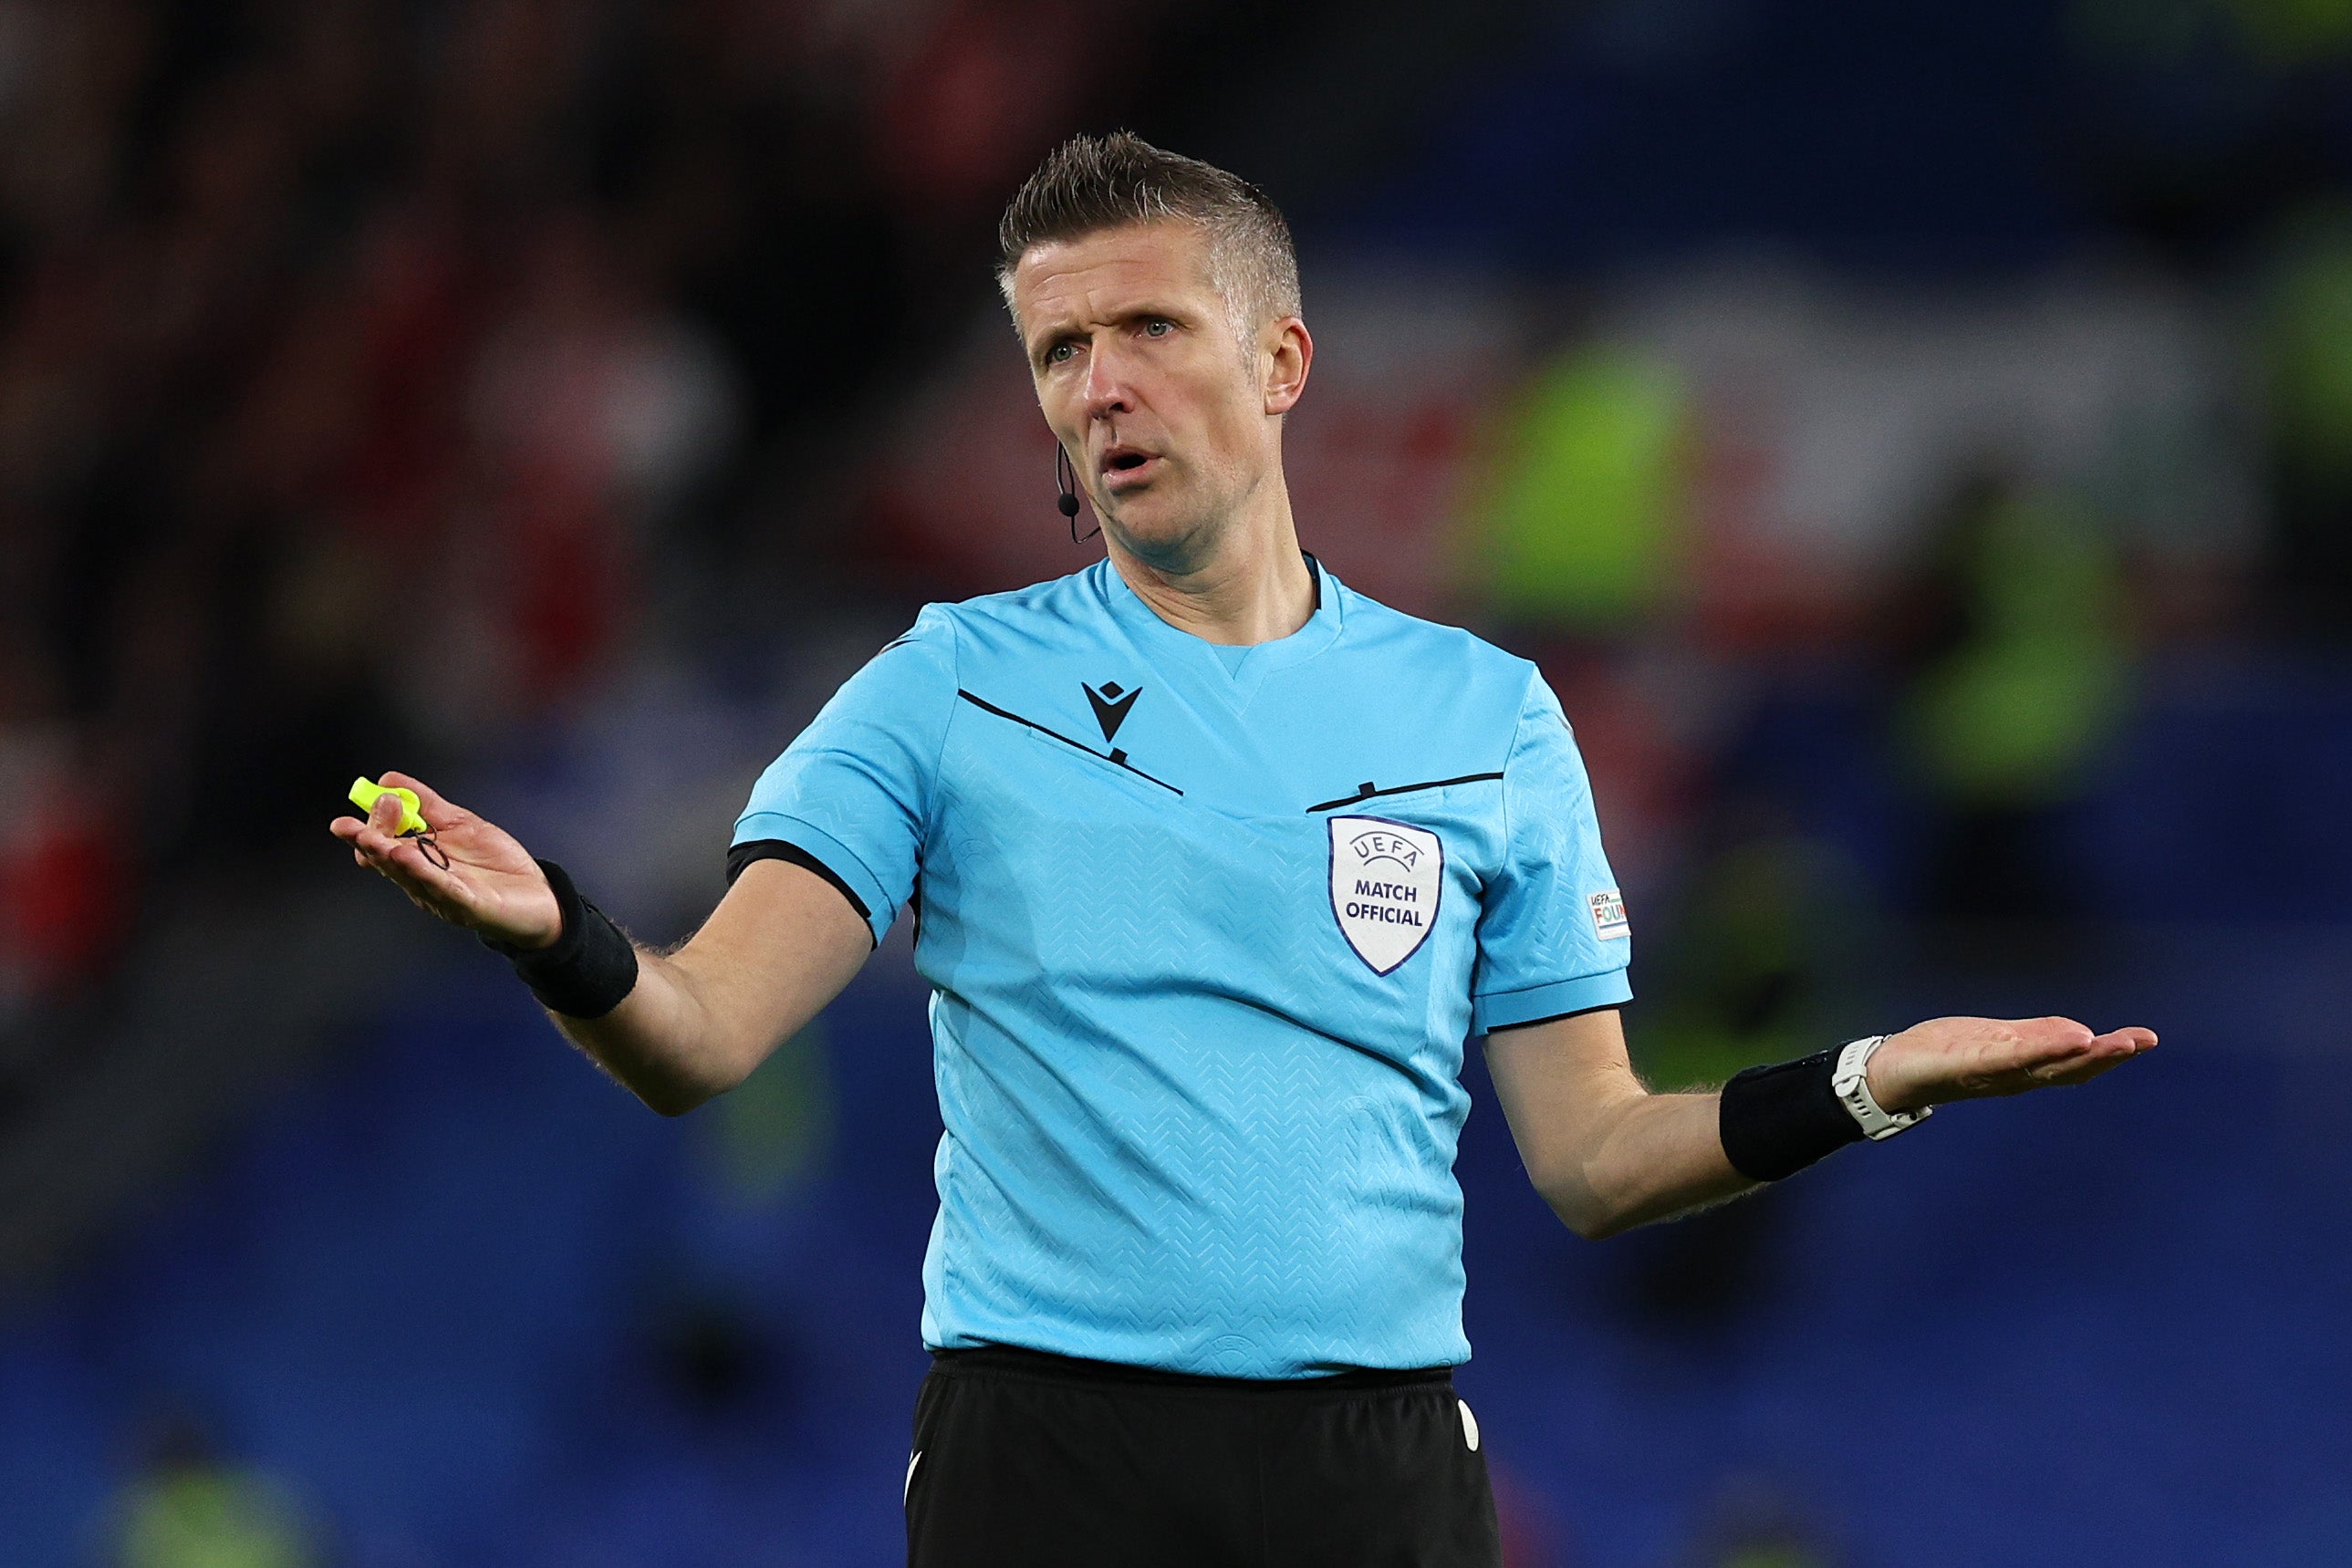 Daniele Orsato will retire from refereeing after Euro 2024